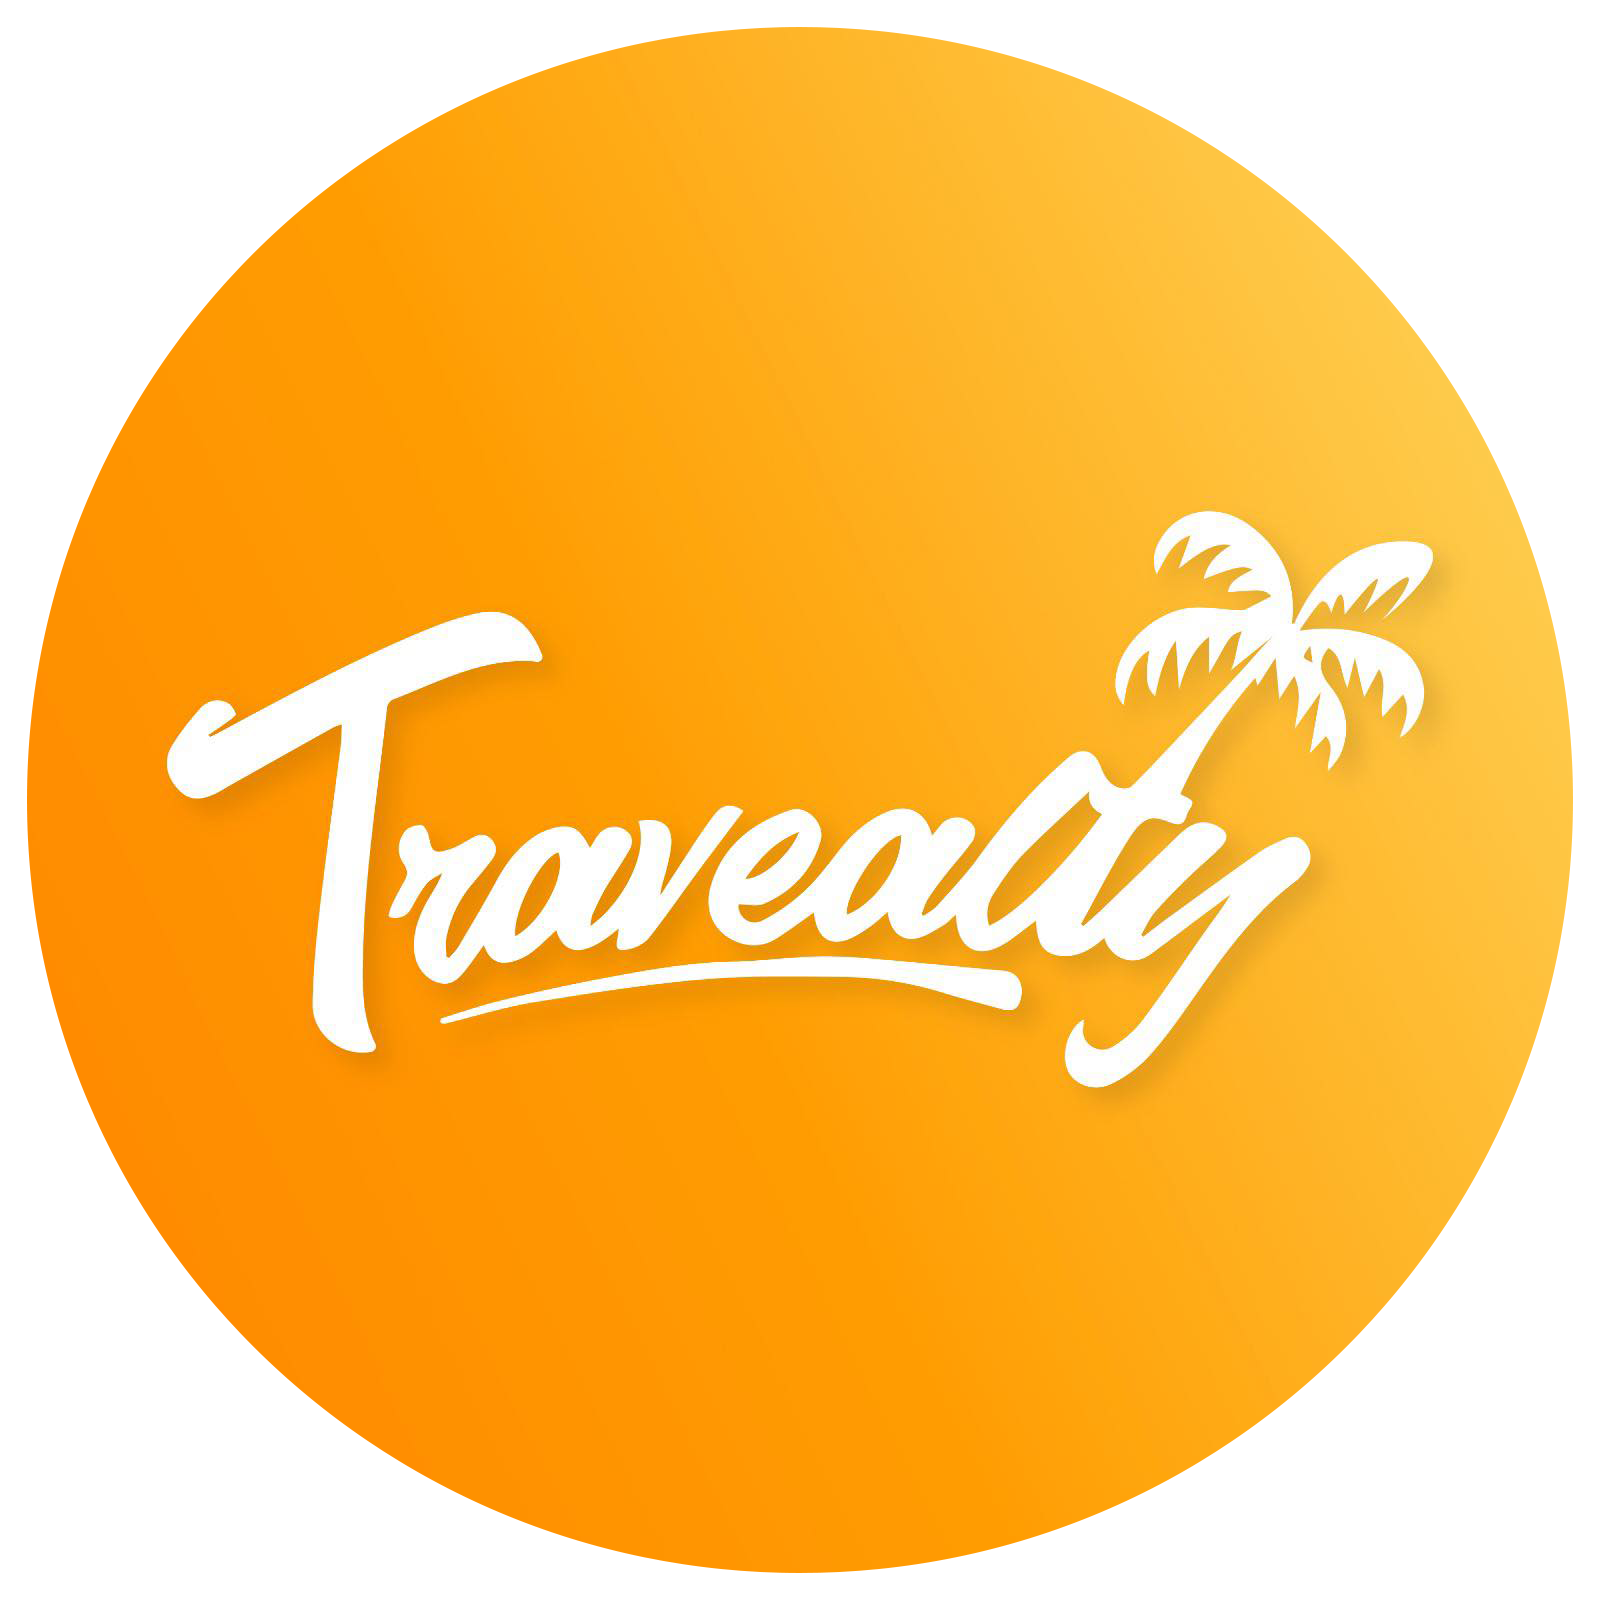 Travealty